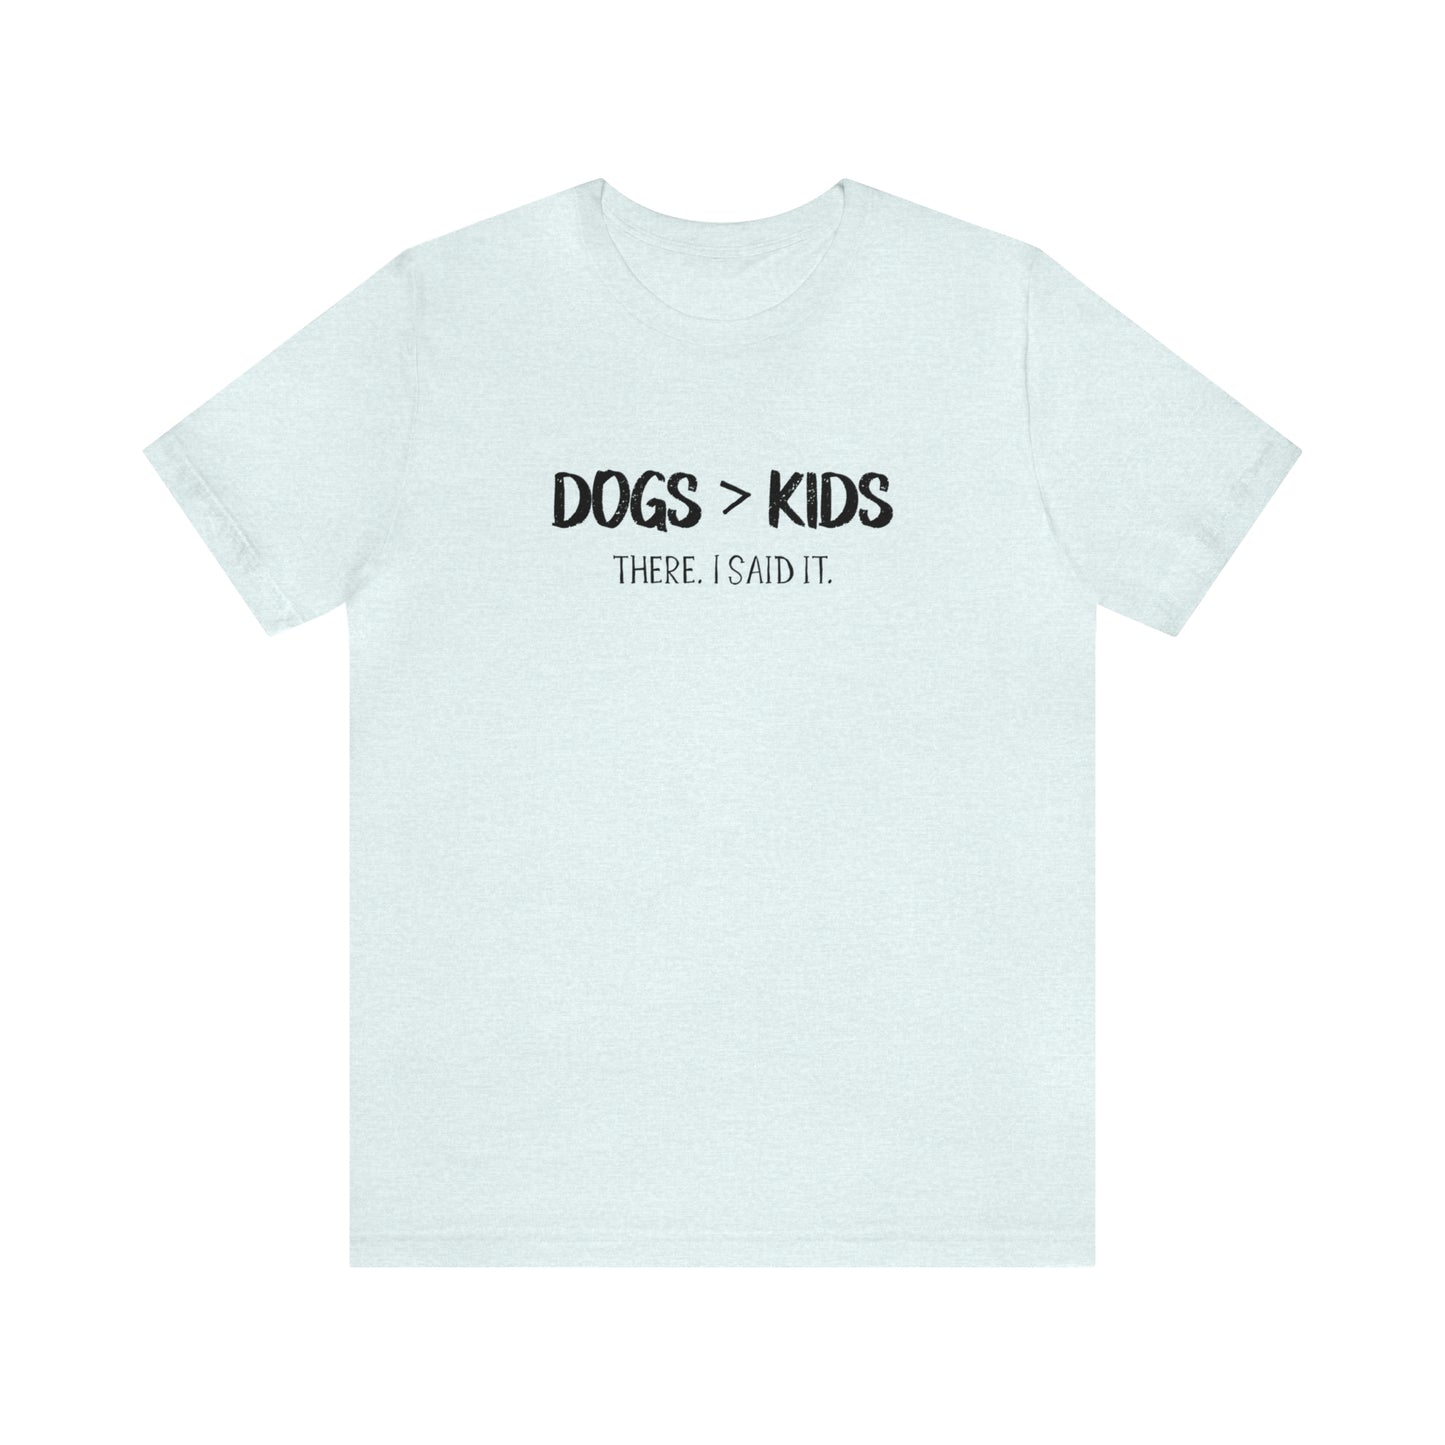 dogs are better than kids t shirt blue